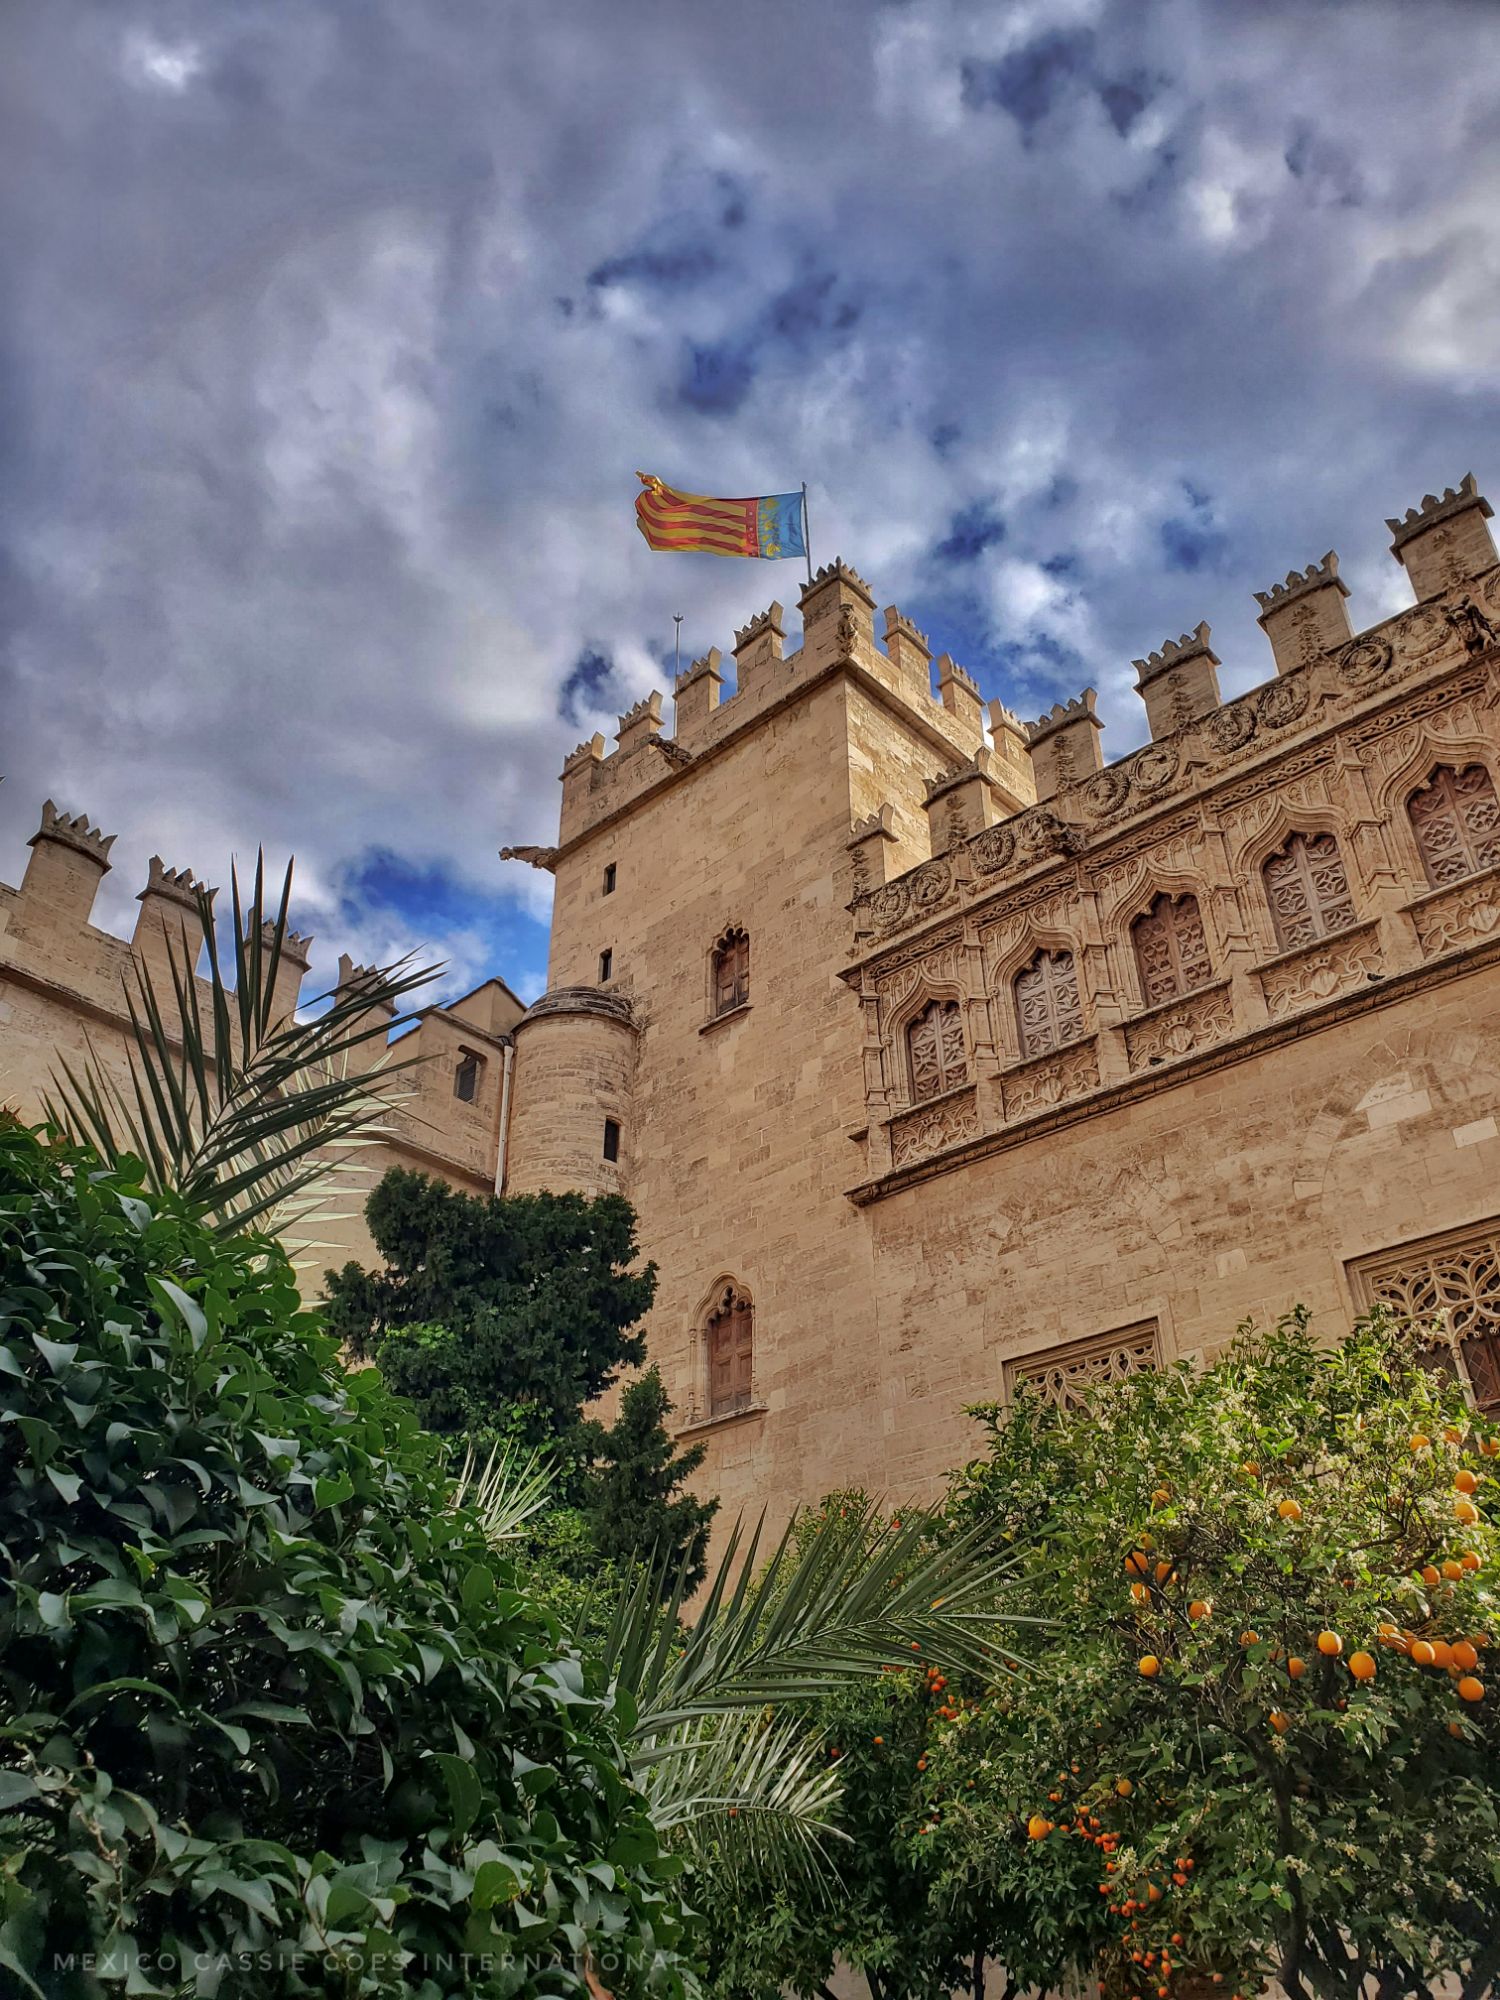 view of a corner of a castle looking building with a flag flying and orange trees all around